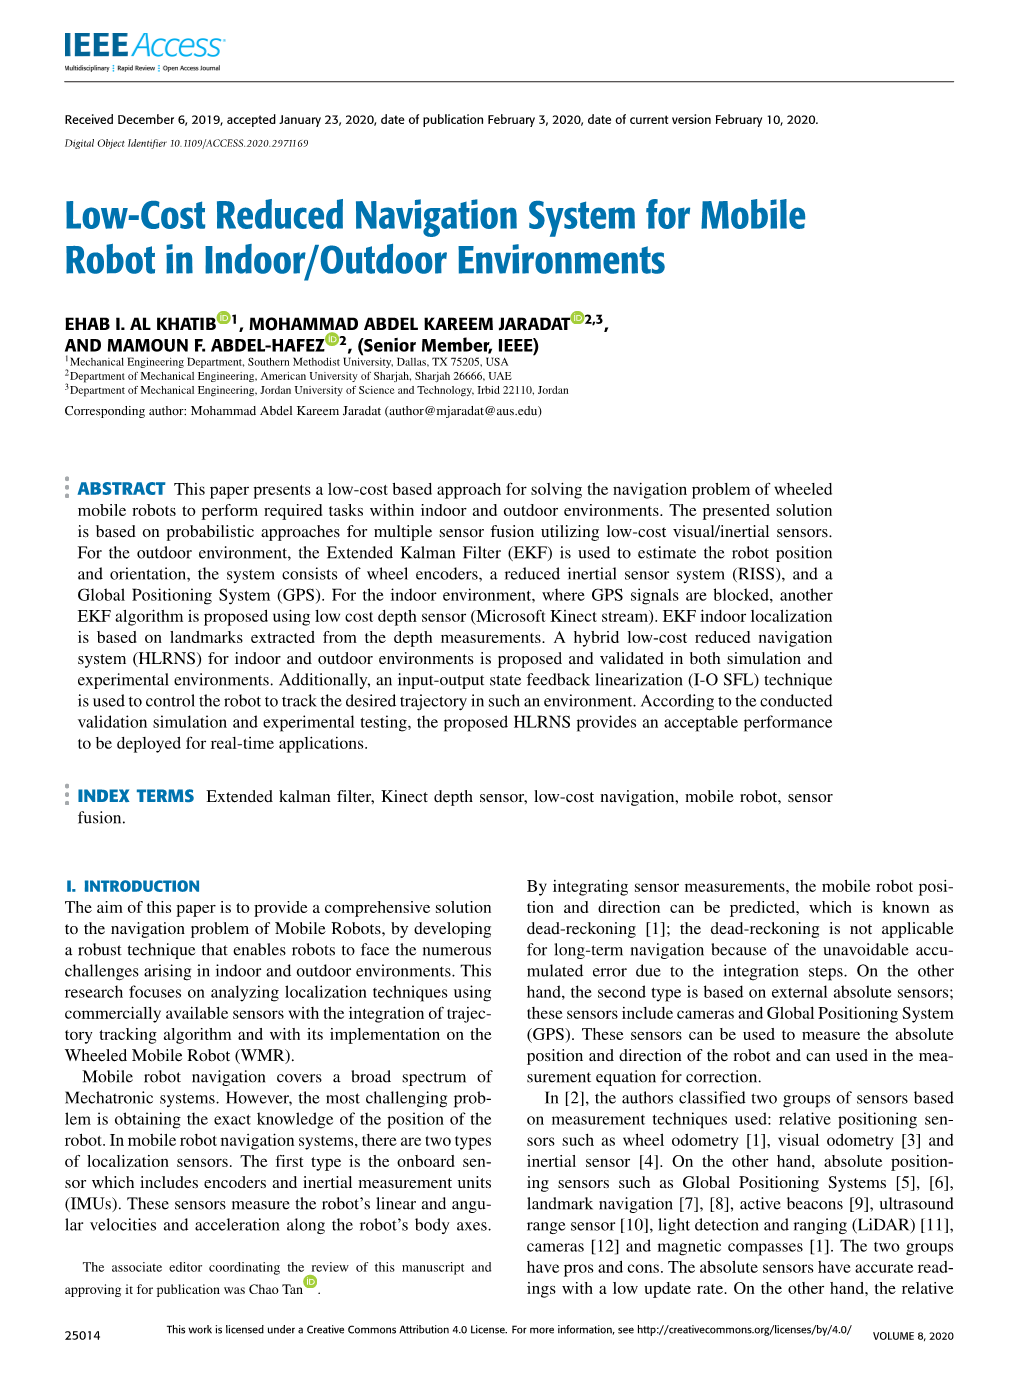 Low-Cost Reduced Navigation System for Mobile Robot in Indoor/Outdoor Environments